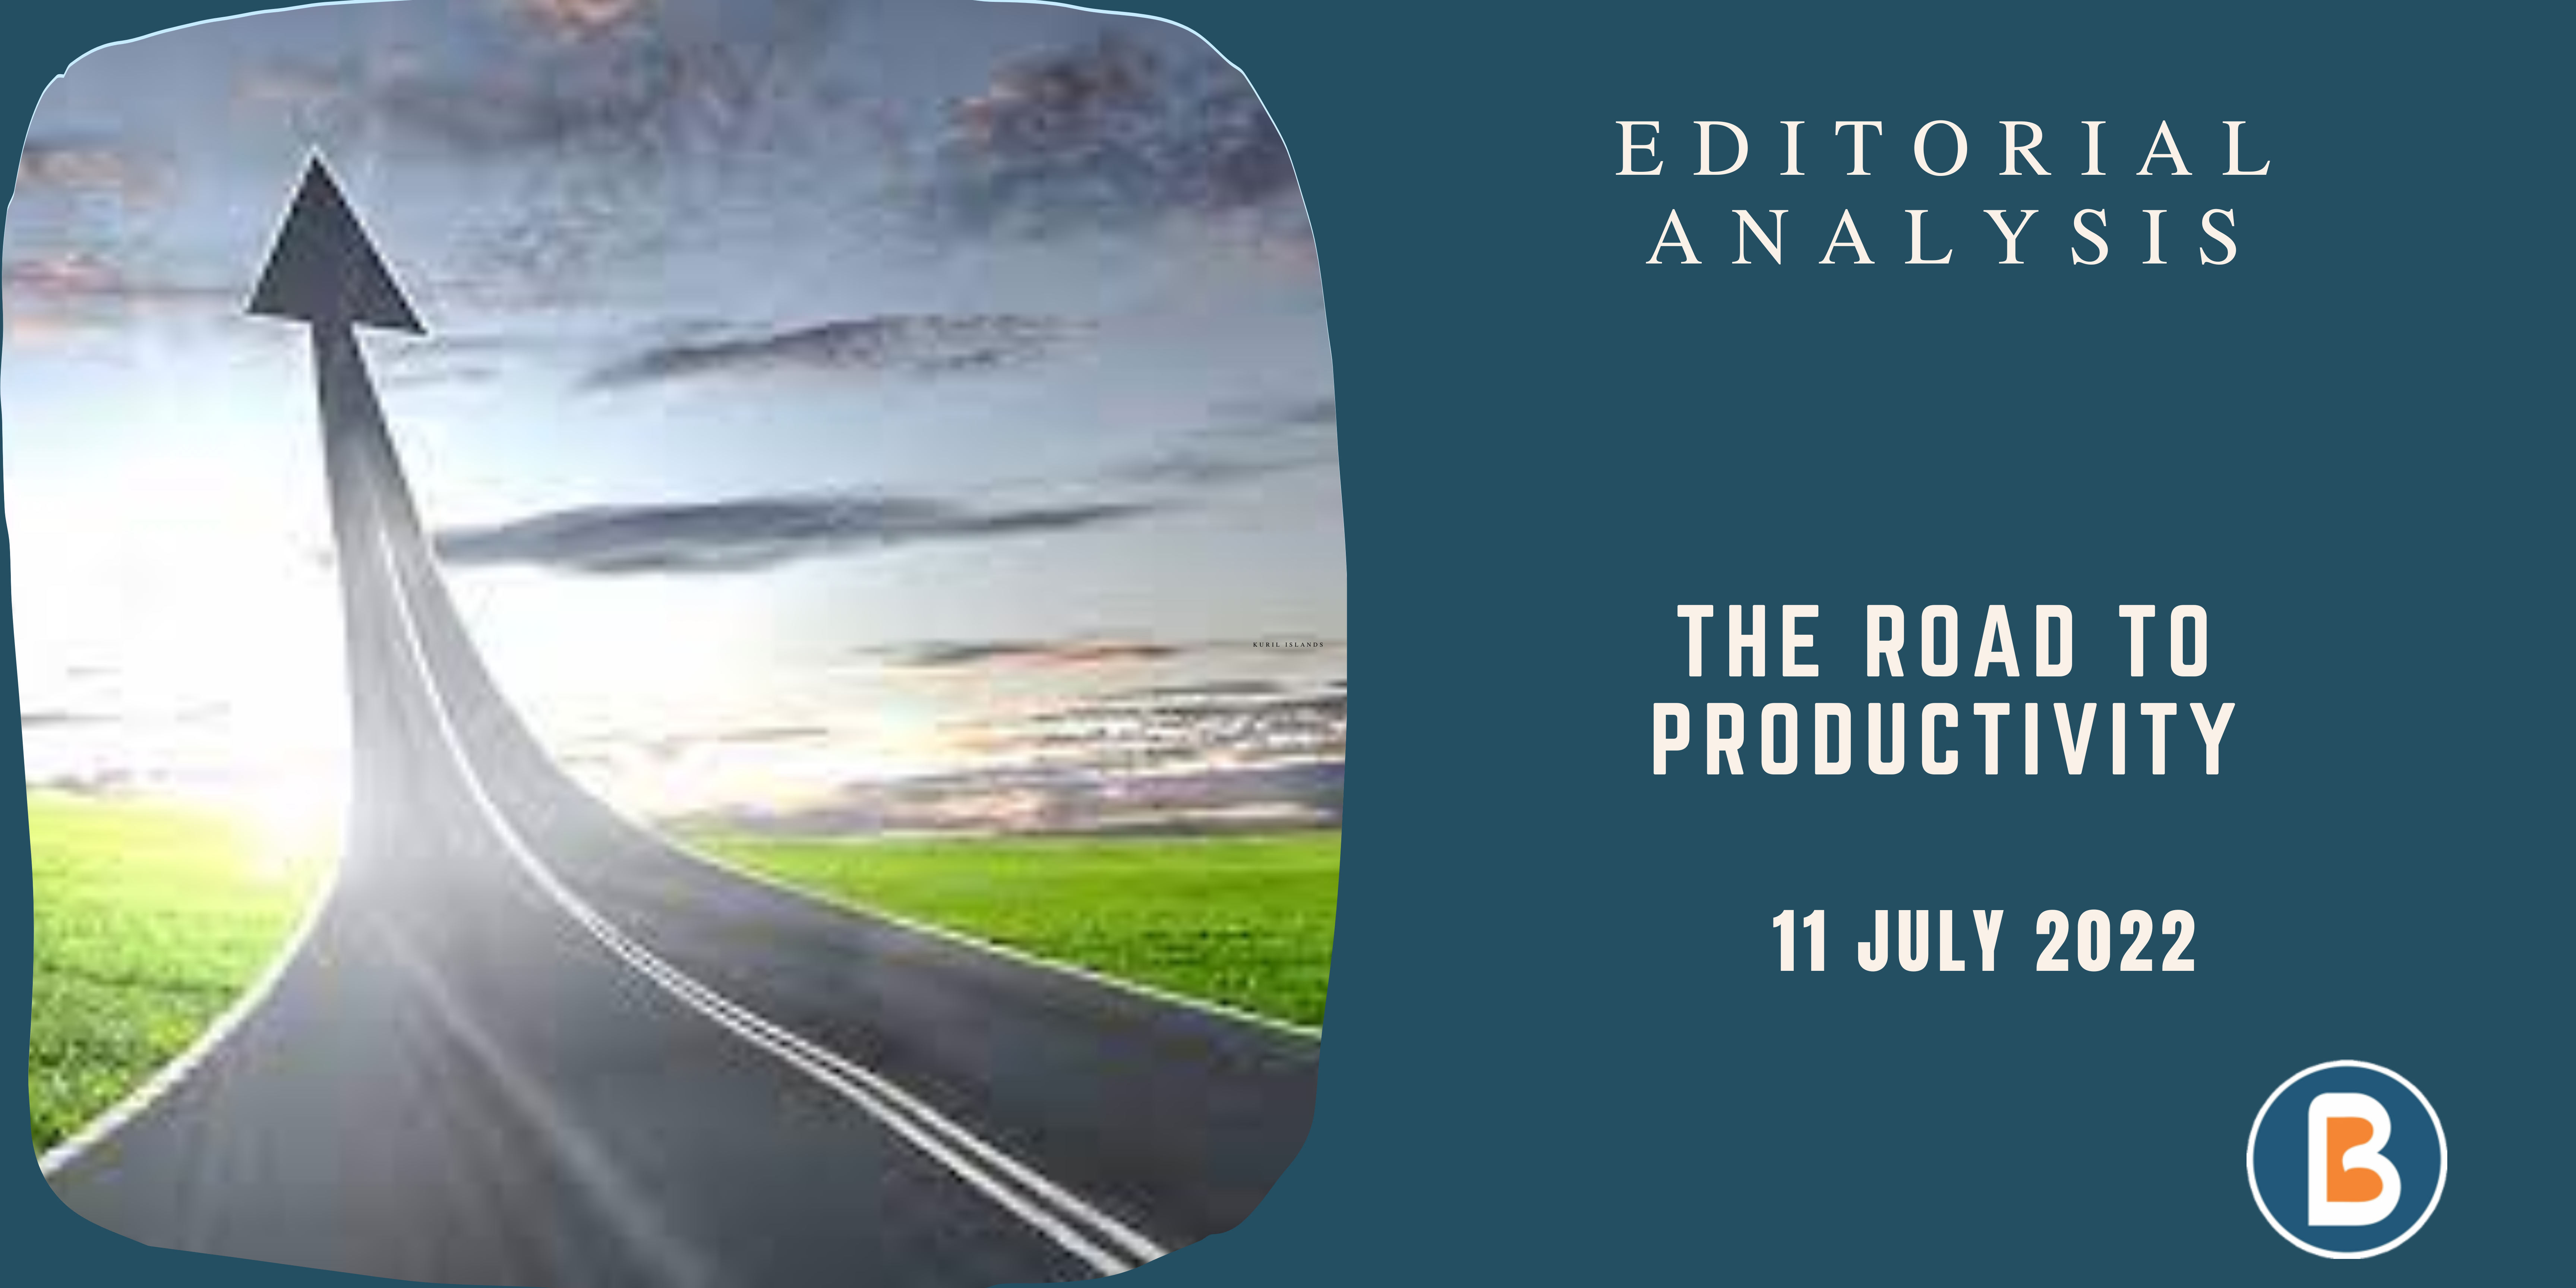 Editorial Analysis for IAS - The Road to Productivity